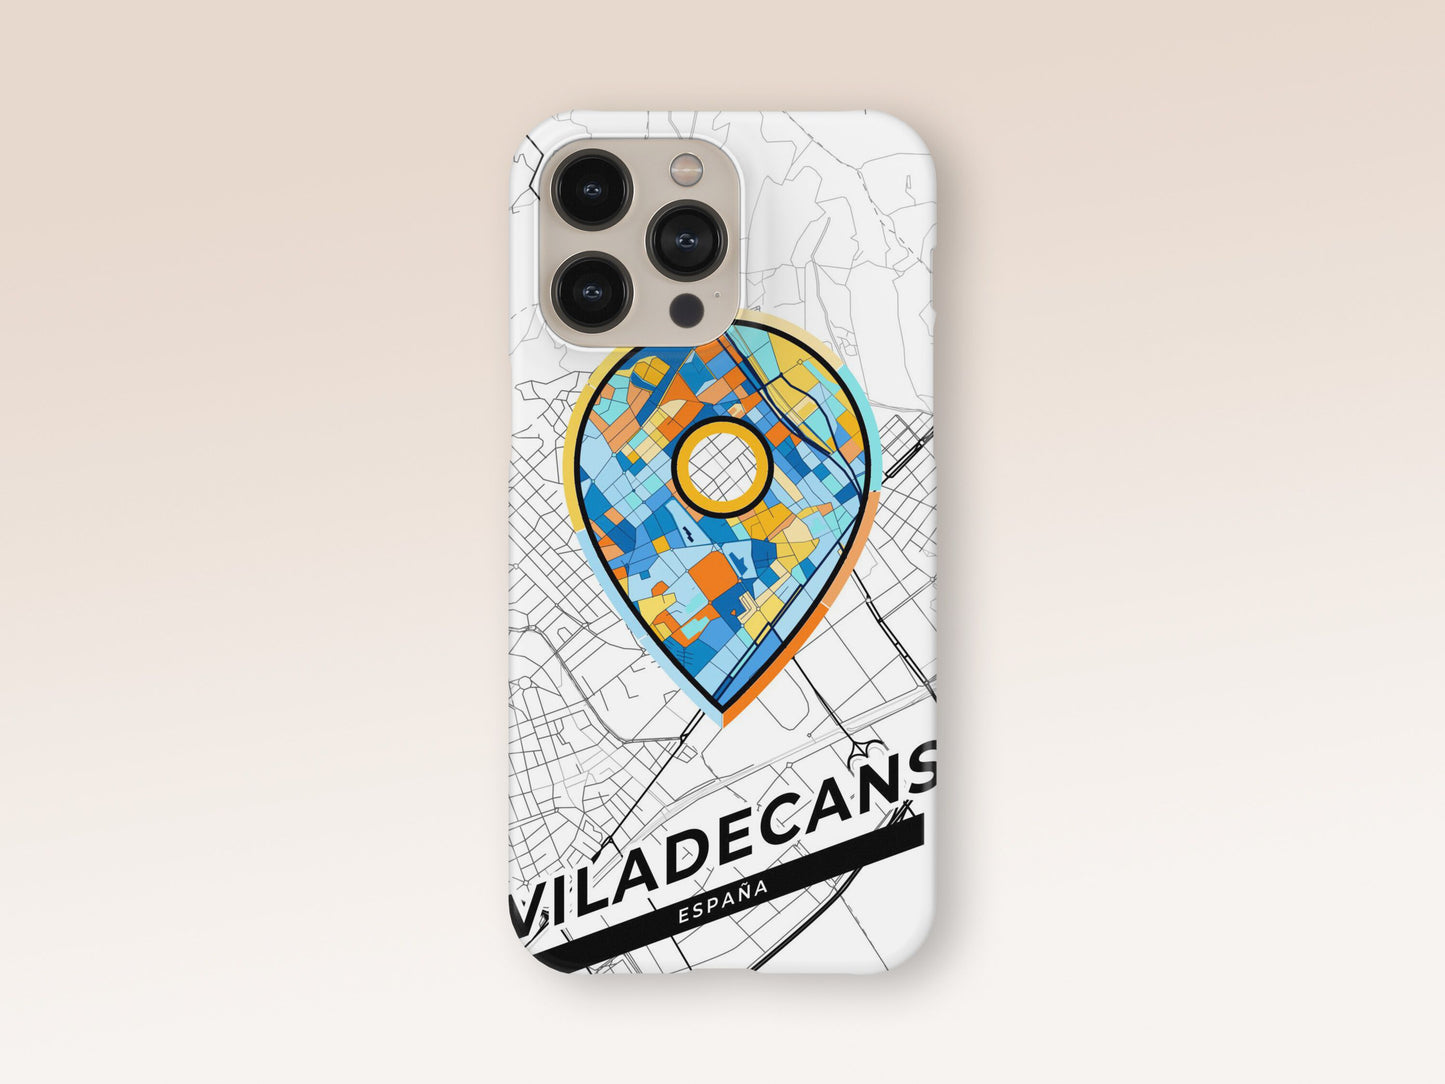 Viladecans Spain slim phone case with colorful icon 1